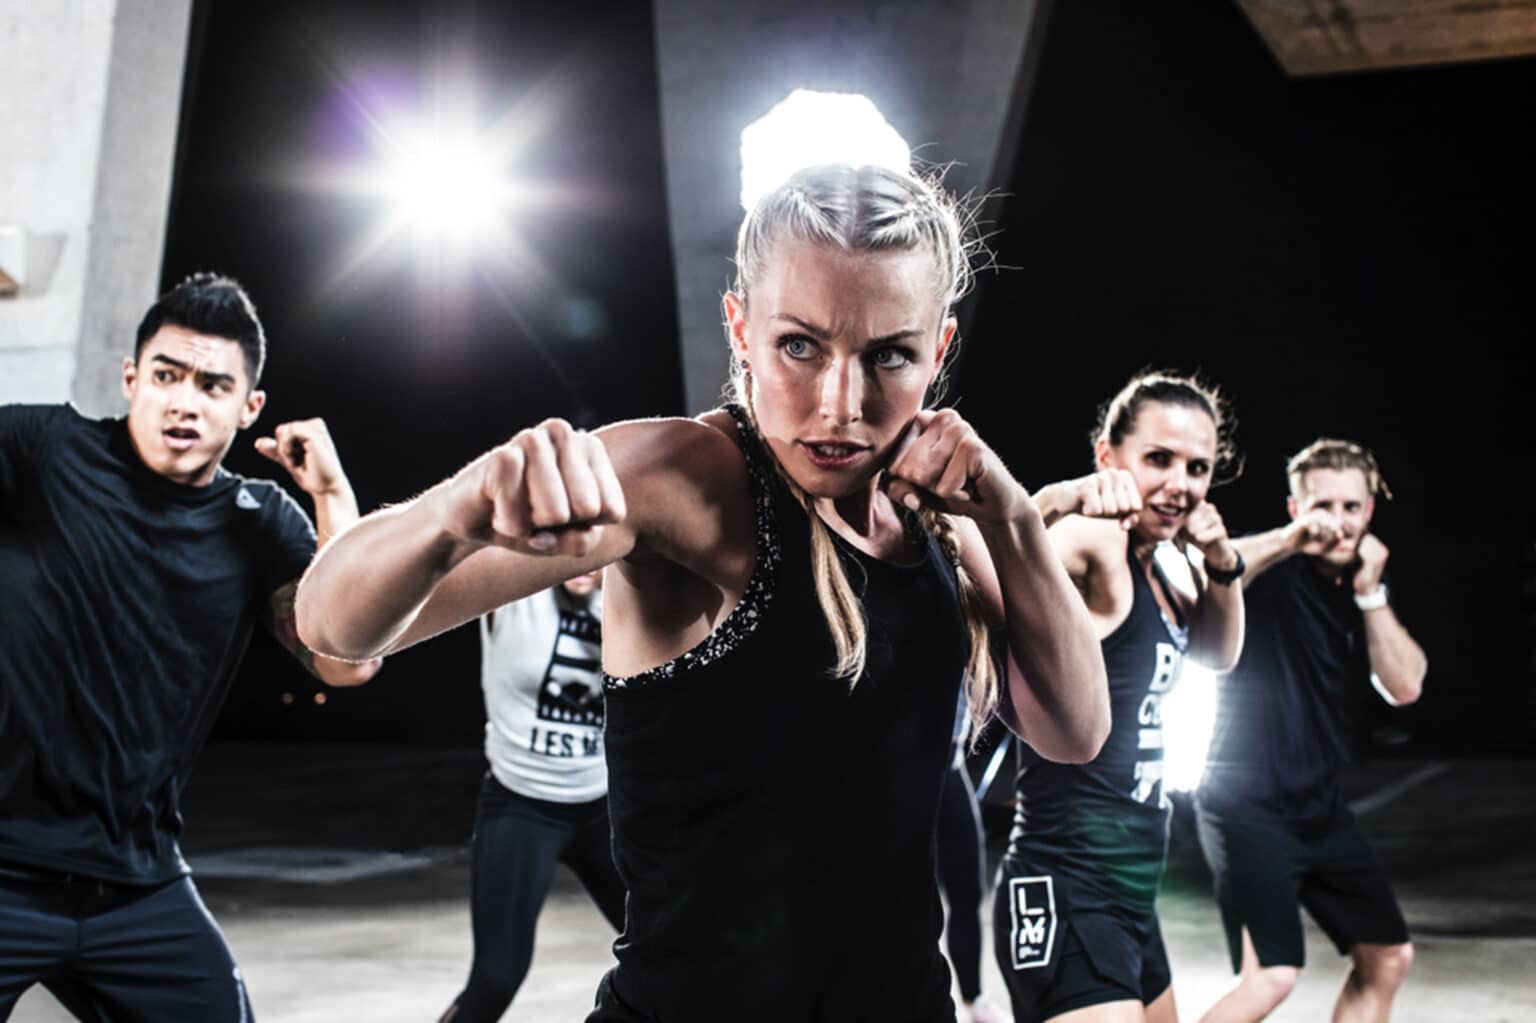 Les Mills Are Bringing Live Fitness Back With The Biggest Live Fitness